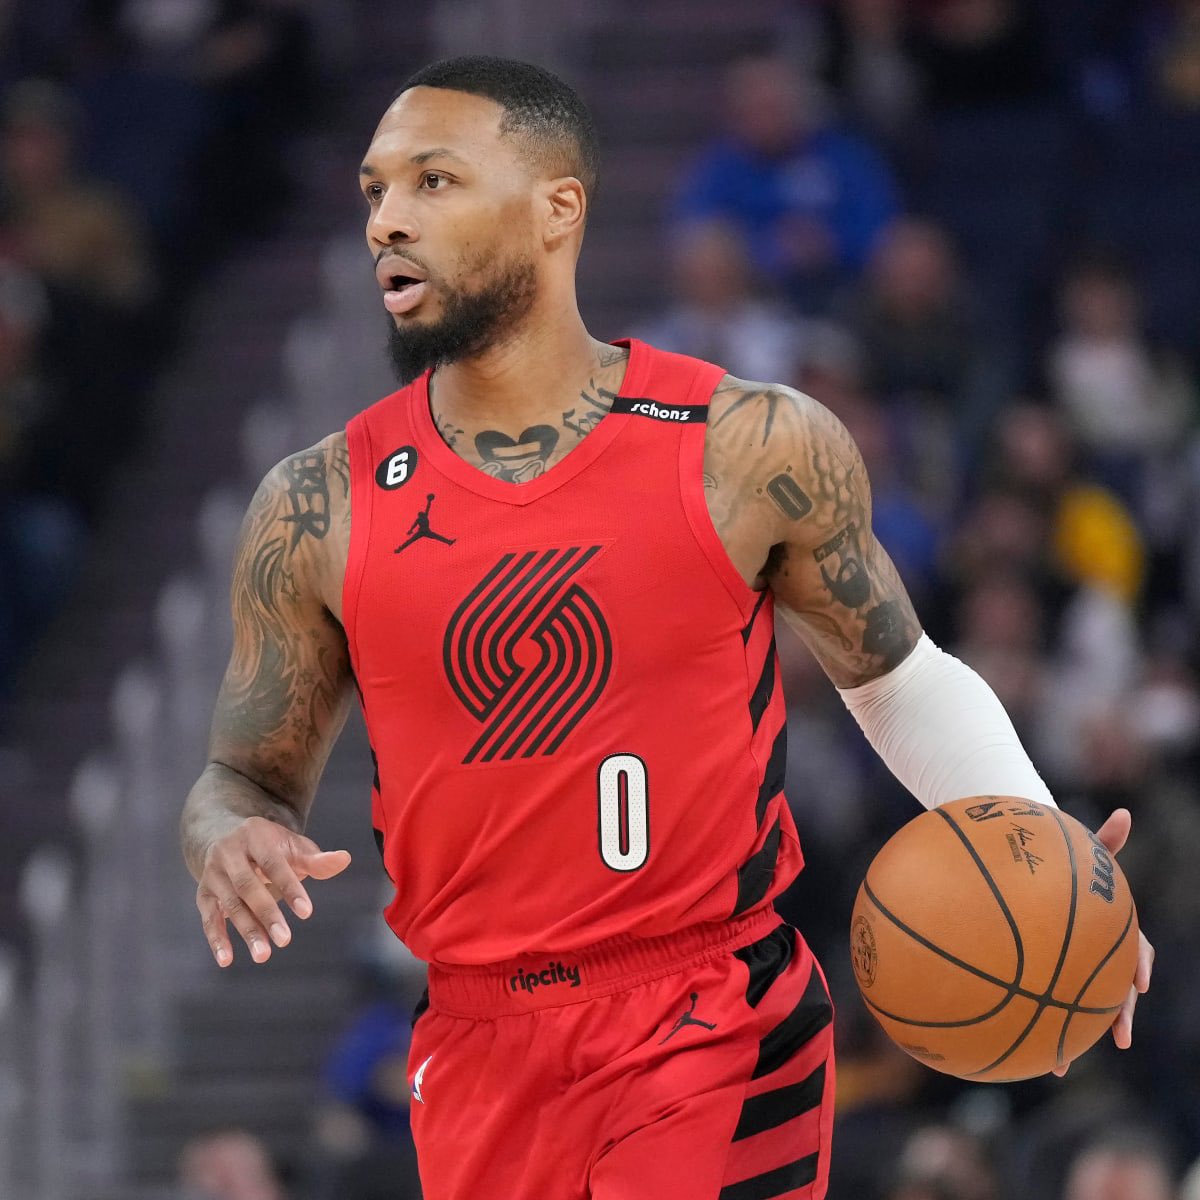 BREAKING: After discussing Portland’s future with Damian Lillard, the Blazers continue to “stay committed to building a winner around Dame.”